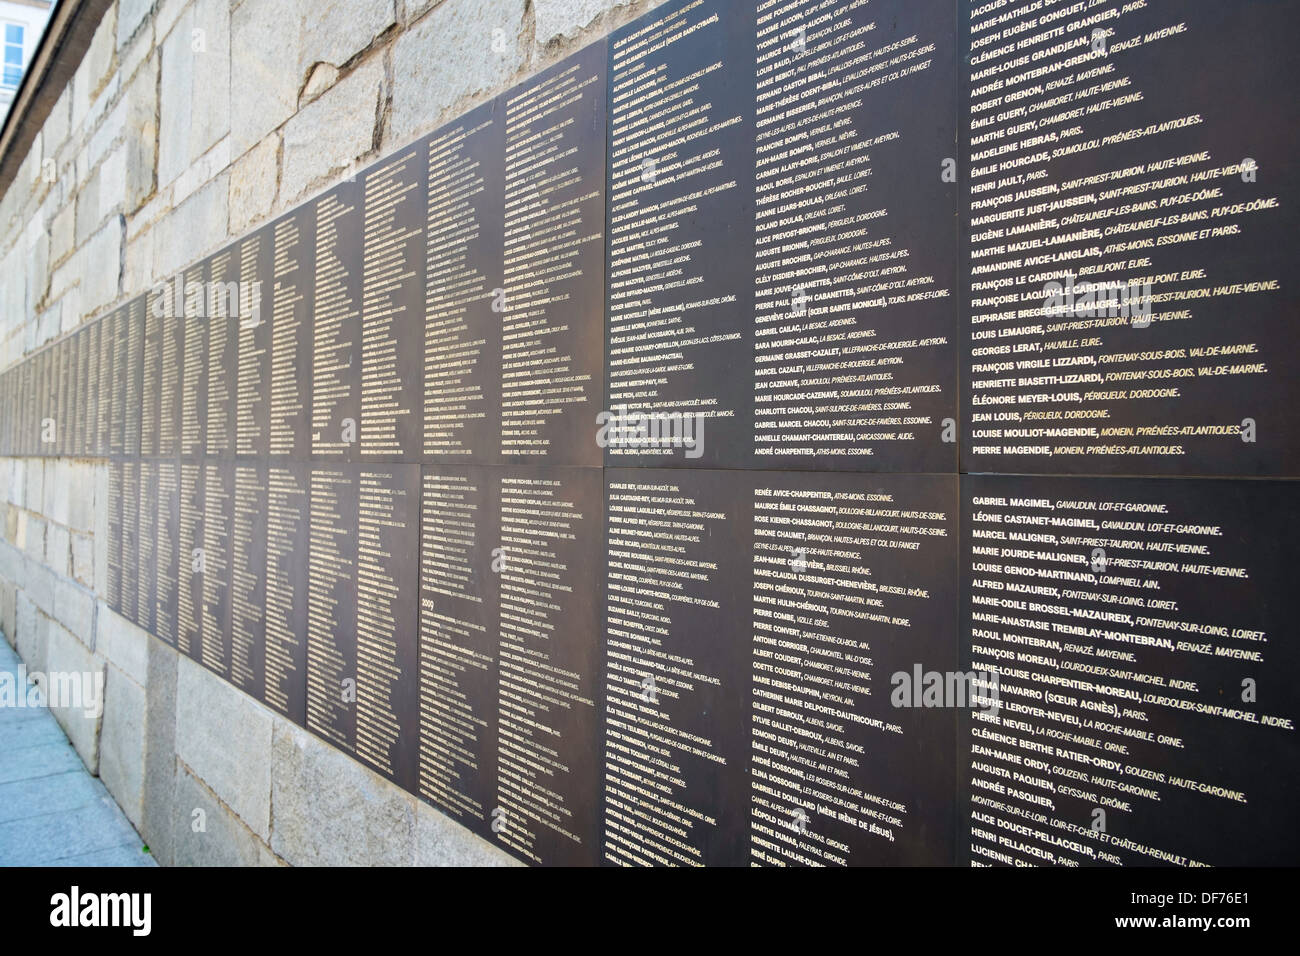 Le Mur des Justes (Wall of the Righteous) at the Holocaust Memorial, Paris, France Stock Photo